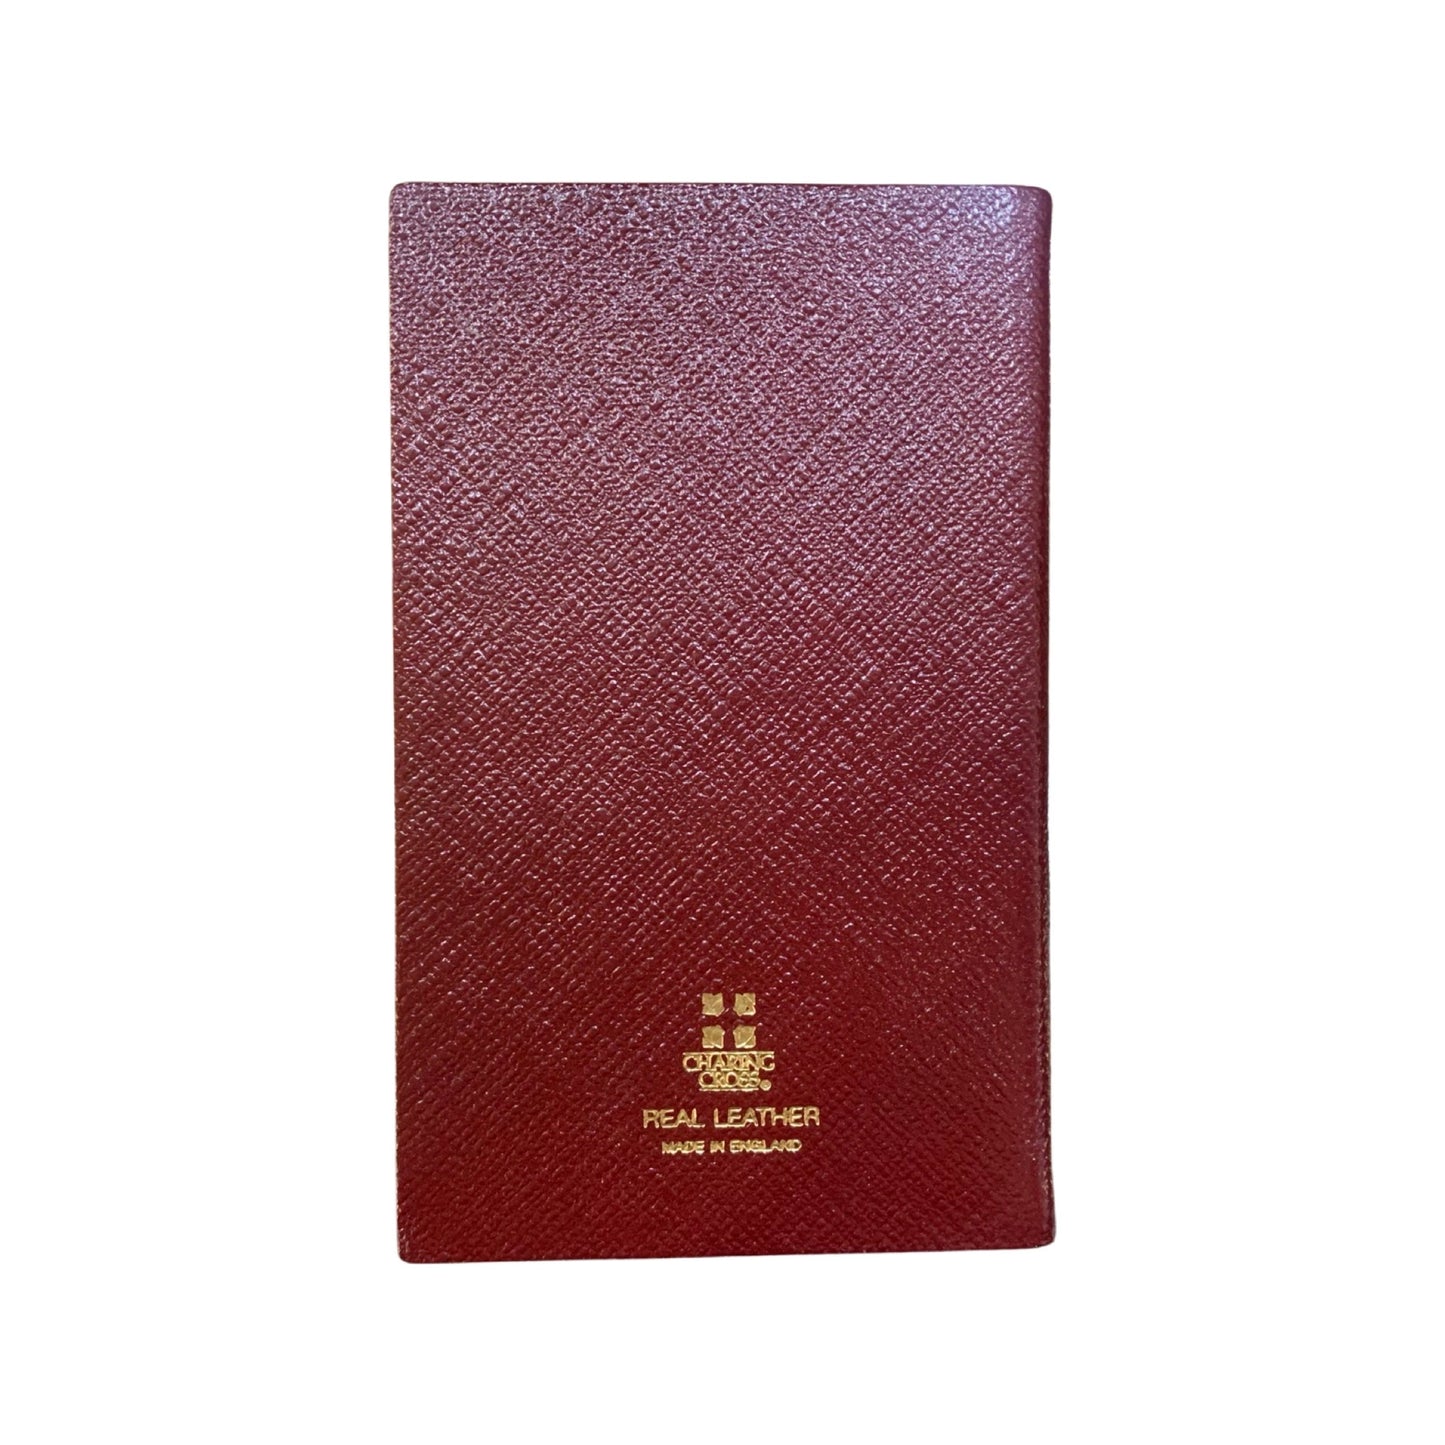 Address Book | 5 by 3 inches | Crossgrain Leather | Charing Cross Leather No.A53L